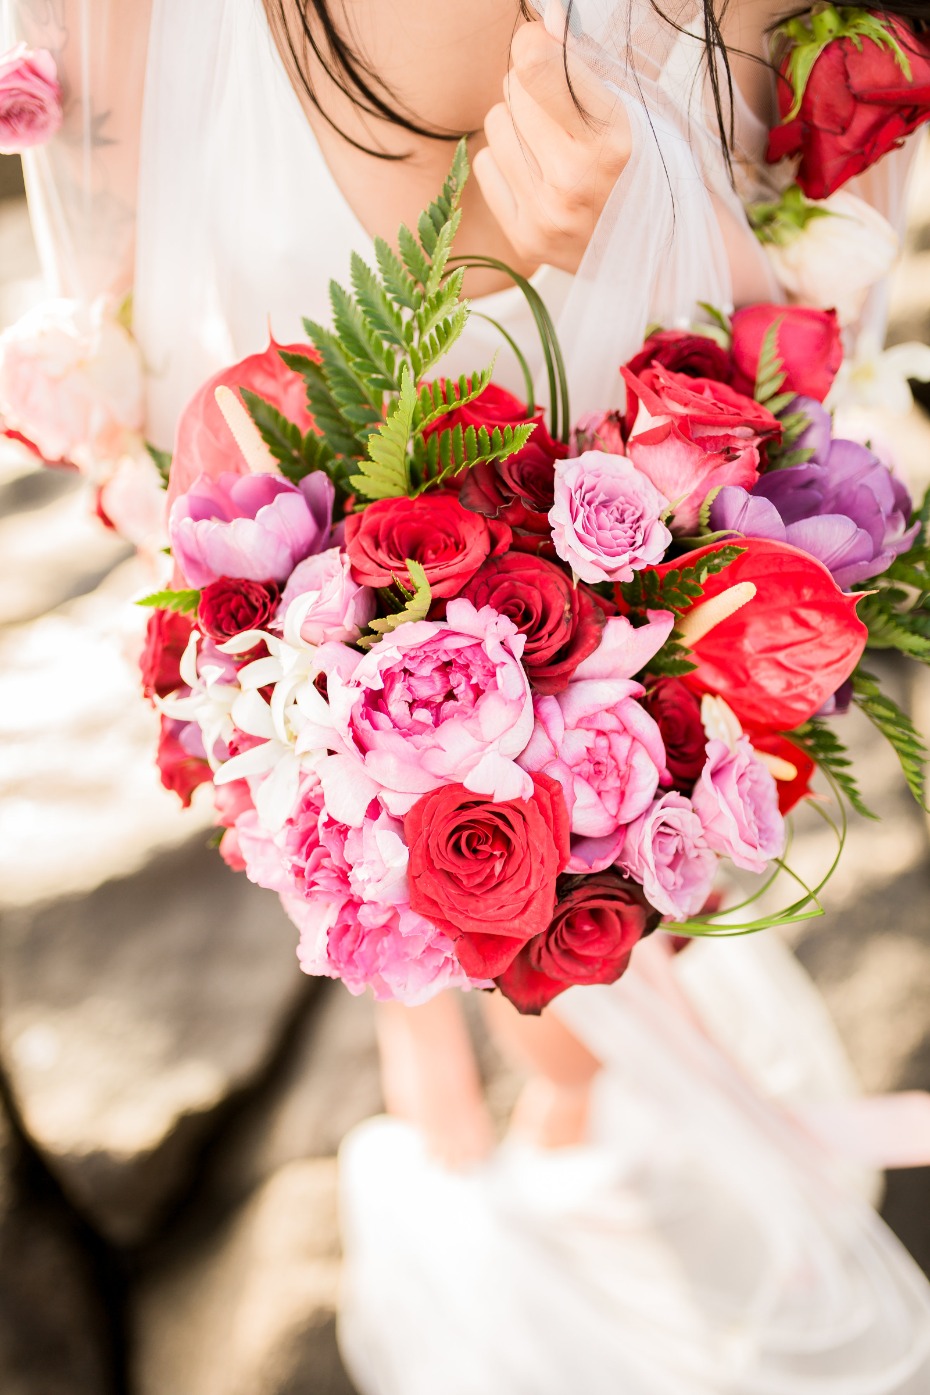 Heart shaped bouquet in pink and red